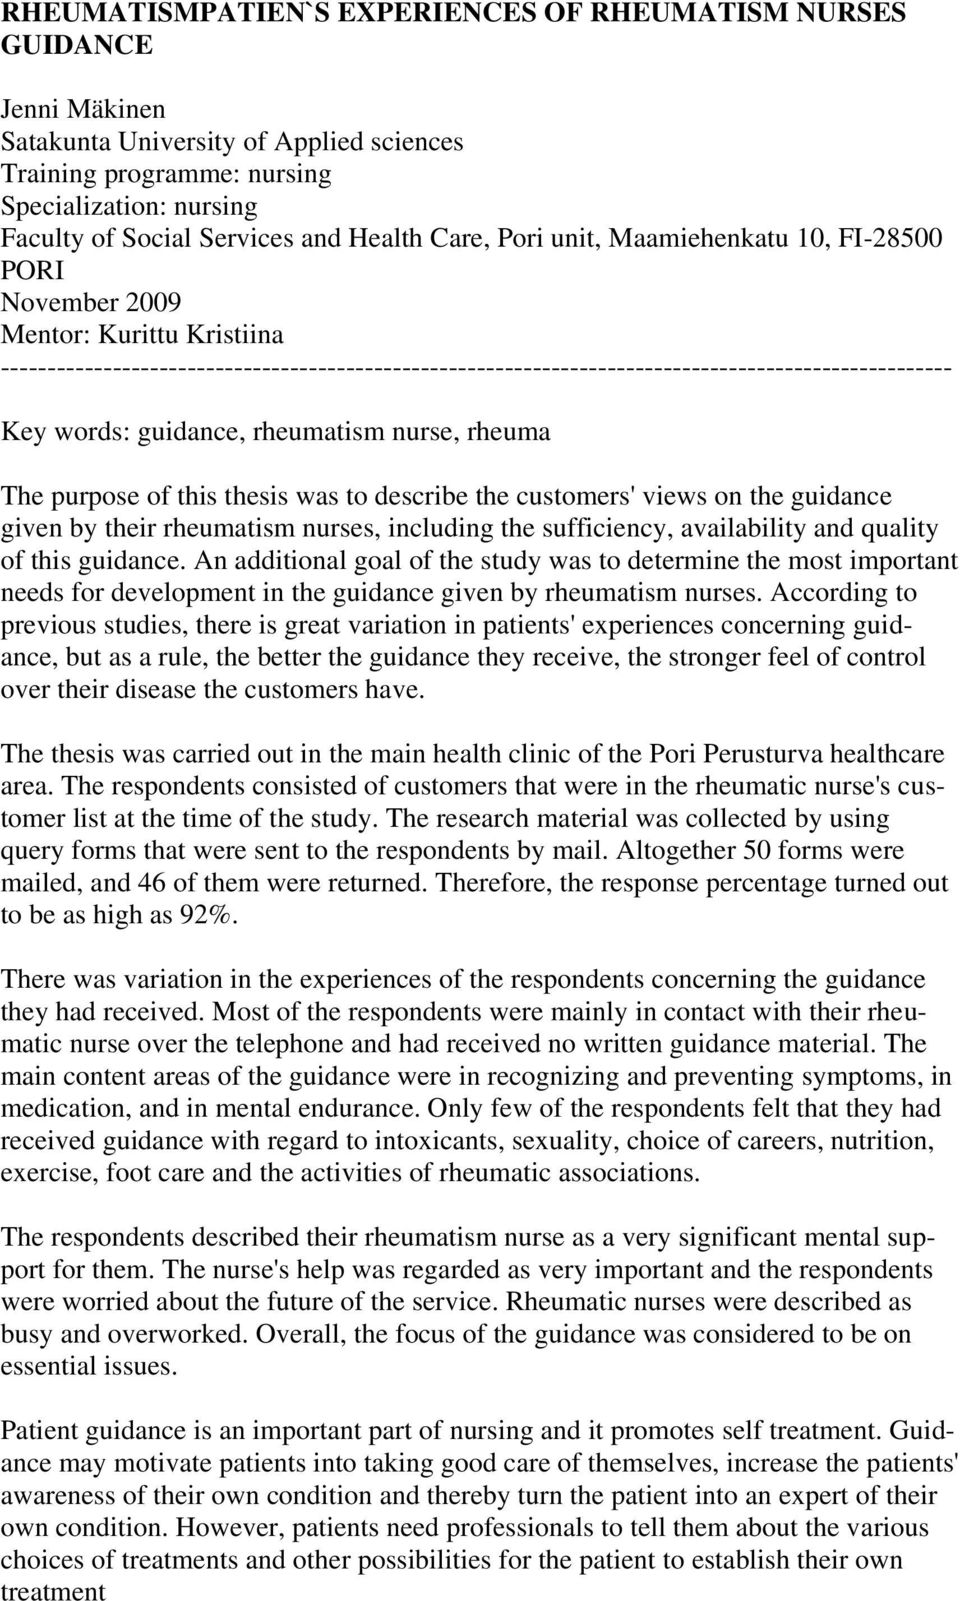 Key words: guidance, rheumatism nurse, rheuma The purpose of this thesis was to describe the customers' views on the guidance given by their rheumatism nurses, including the sufficiency, availability